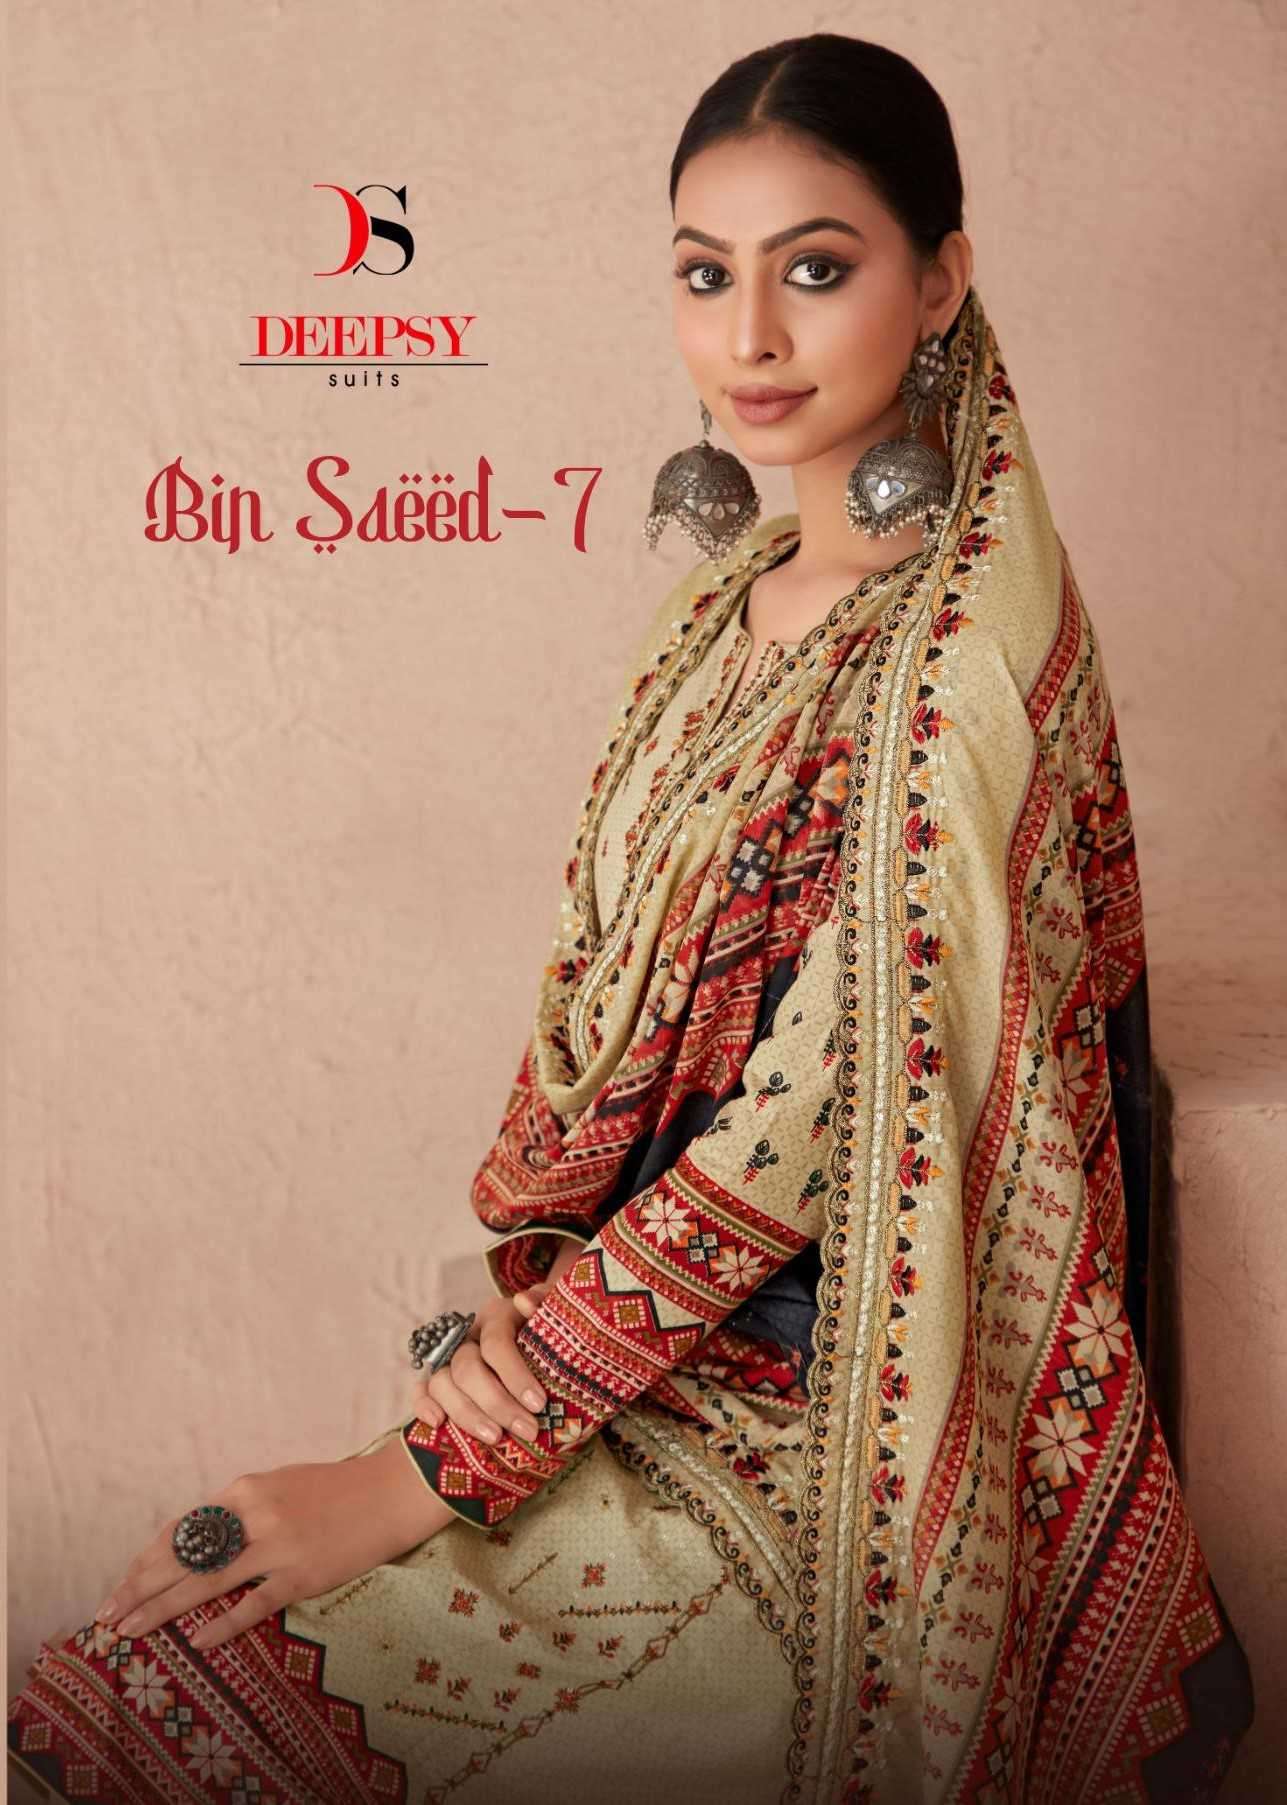 deepsy suits bin saeed vol 7  COTTON WITH DIGITAL PRINTED PA...